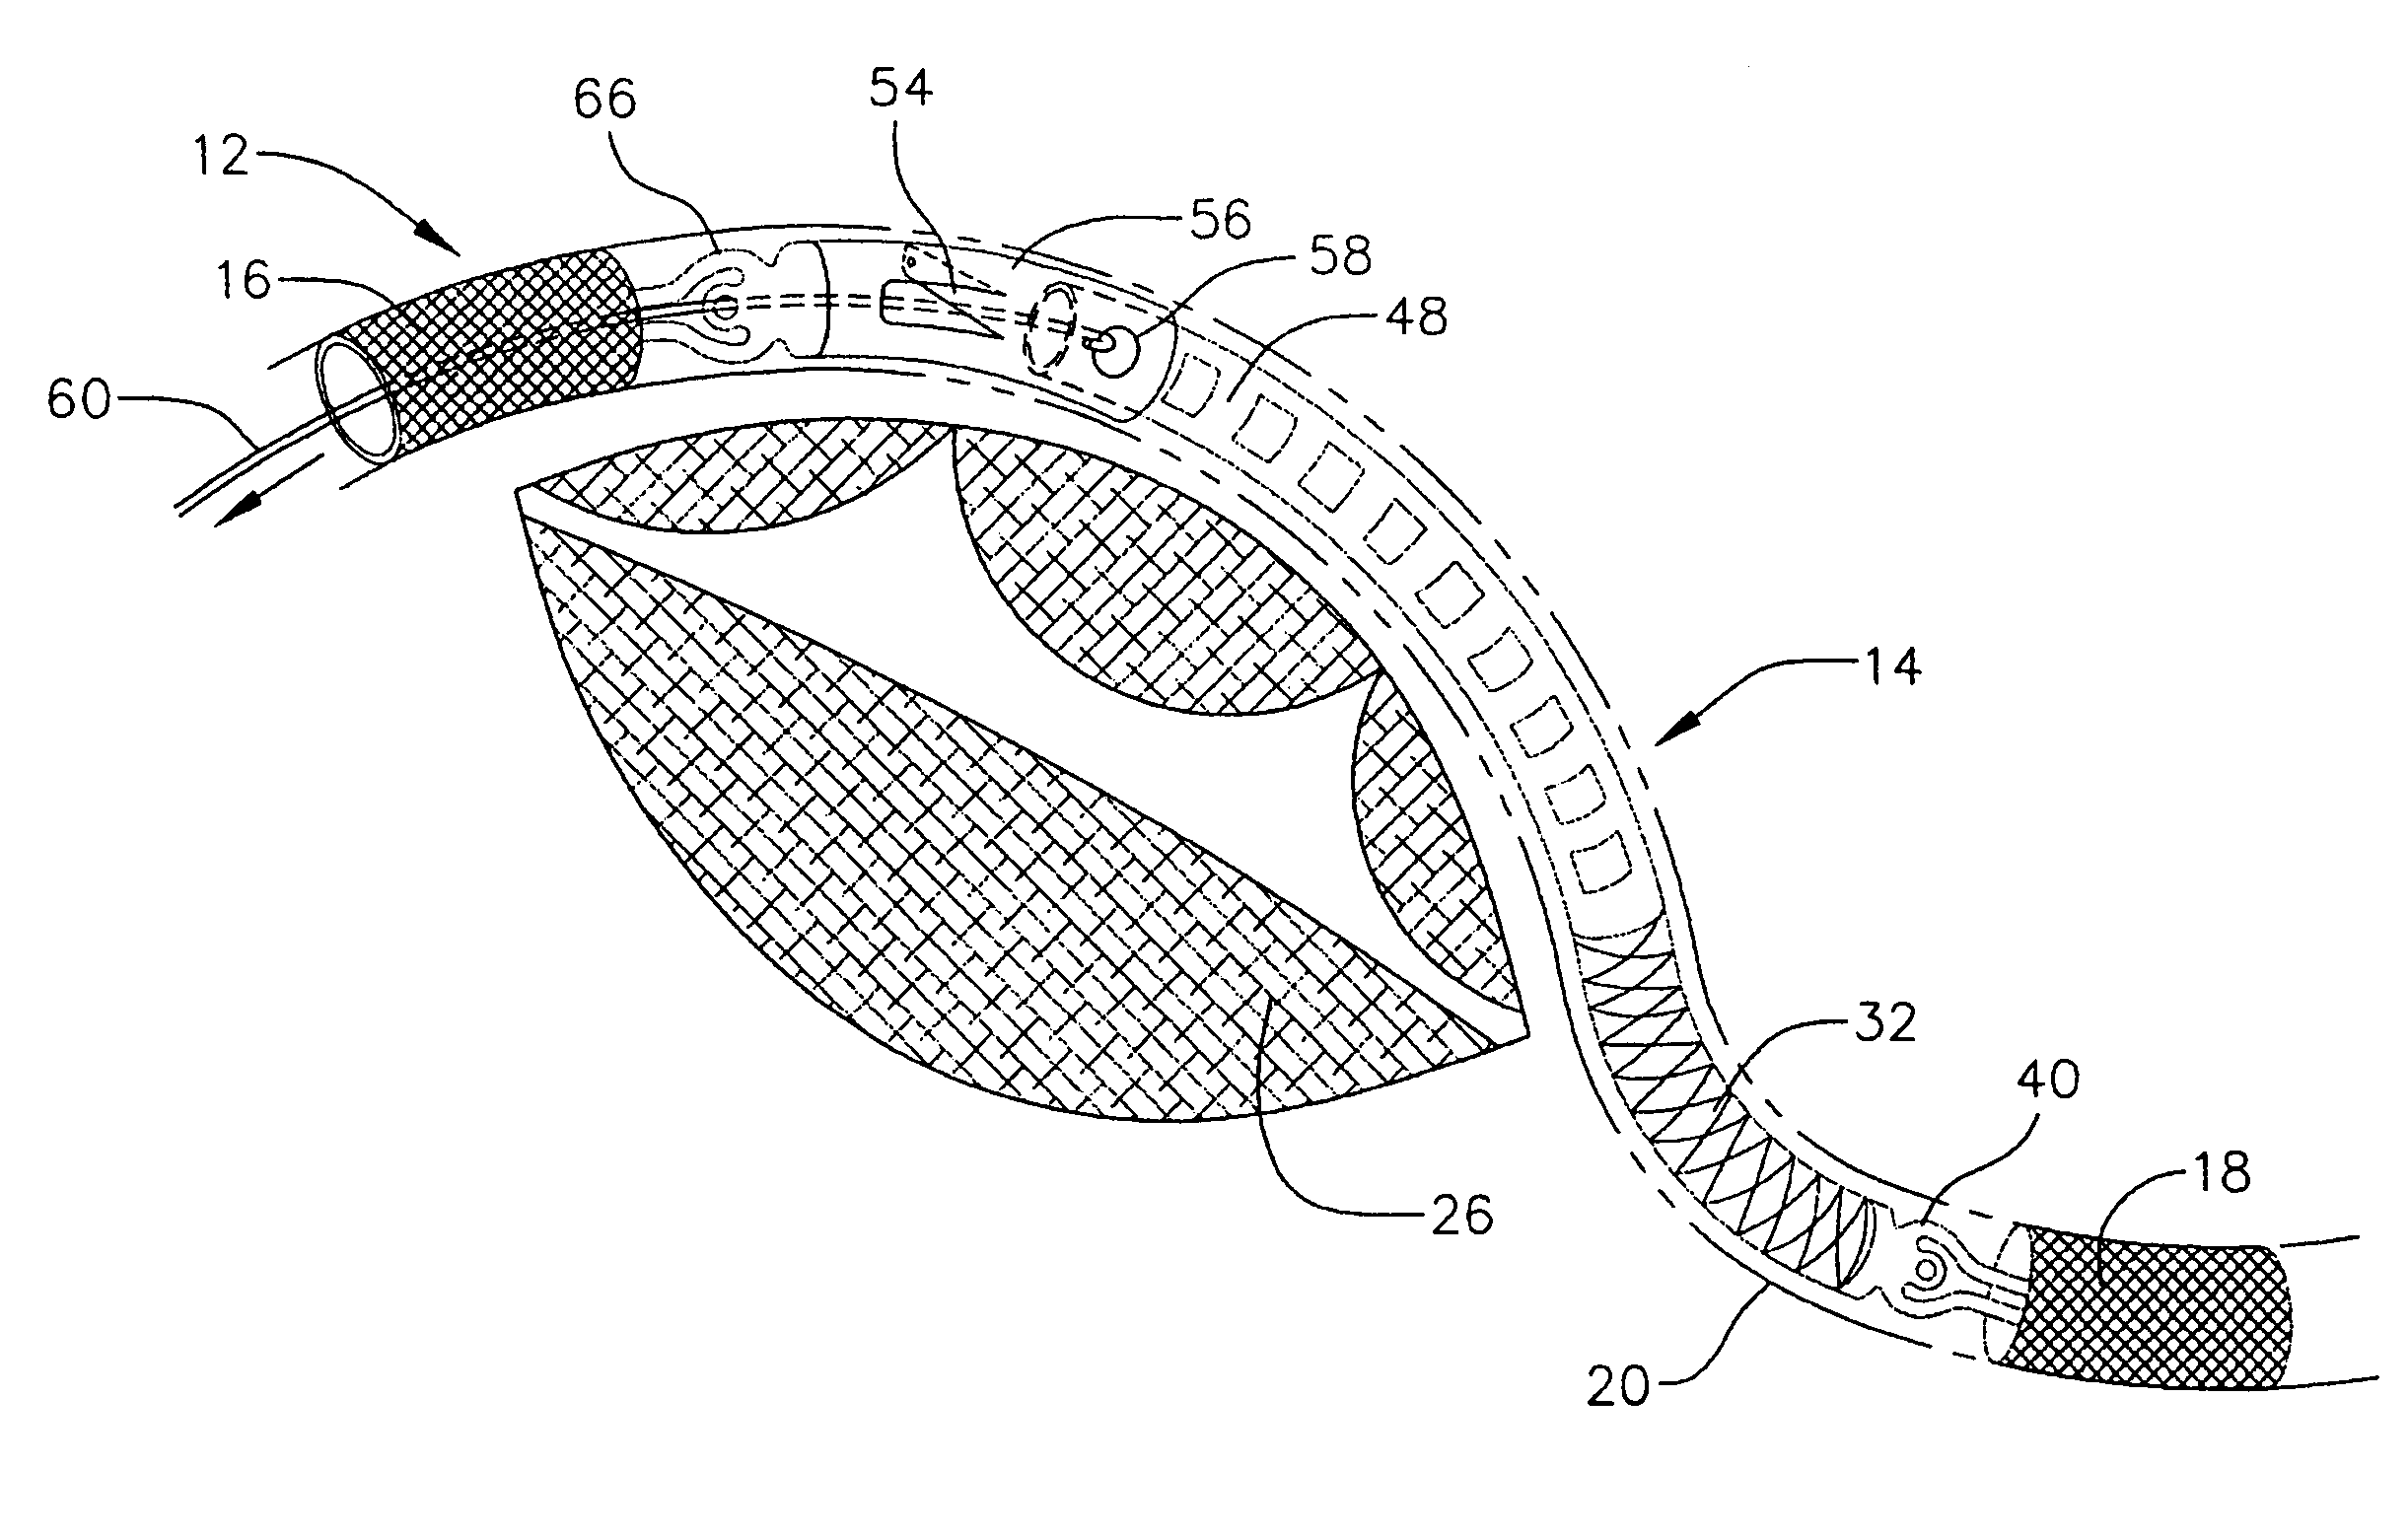 Devices and methods for percutaneous repair of the mitral valve via the coronary sinus